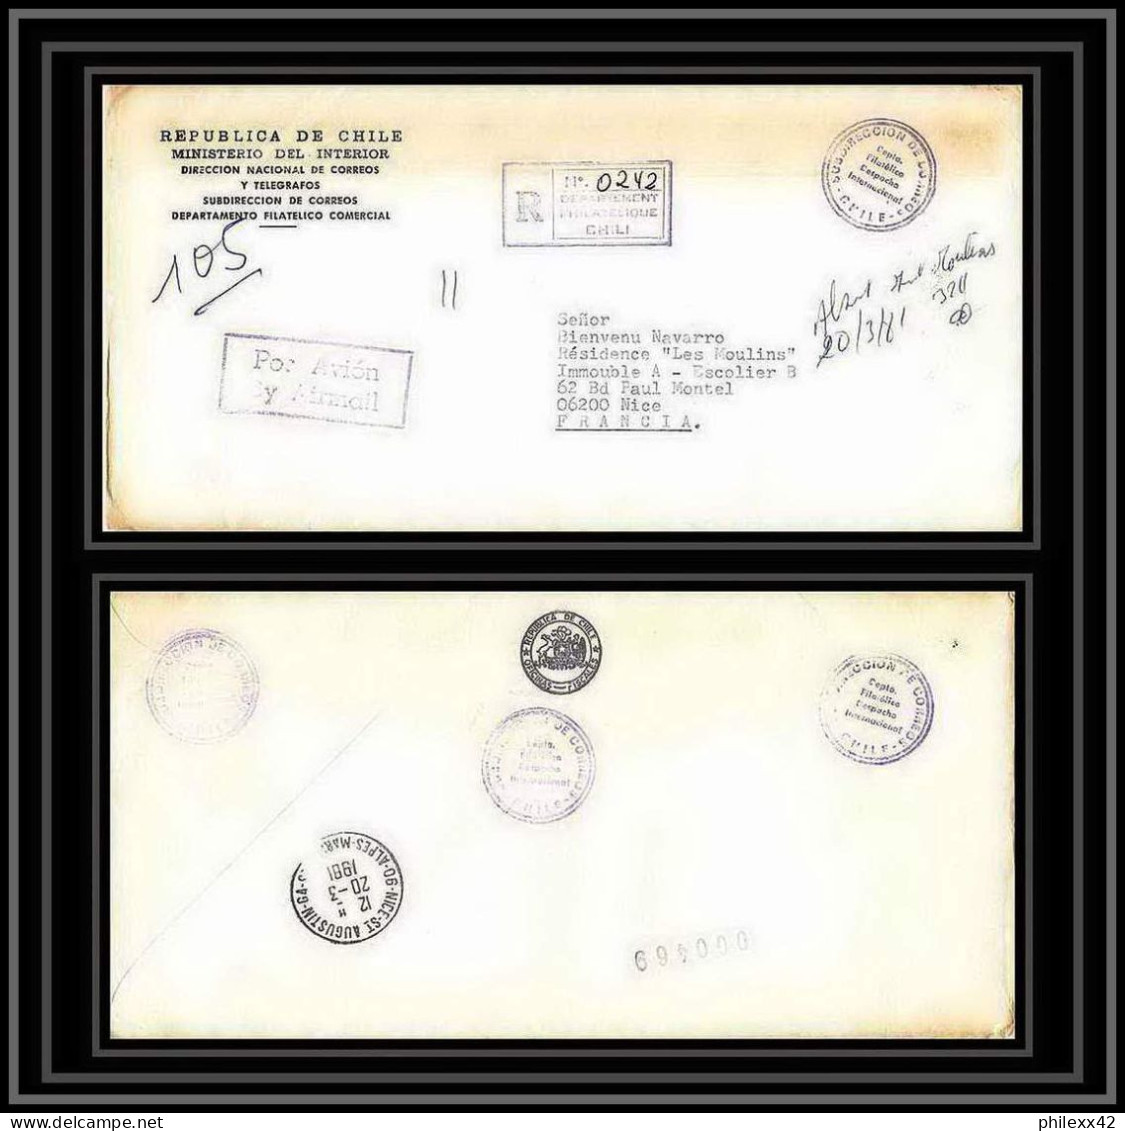 2013 Chili (chile) Lettre (cover) 20/3/1981 - Research Stations